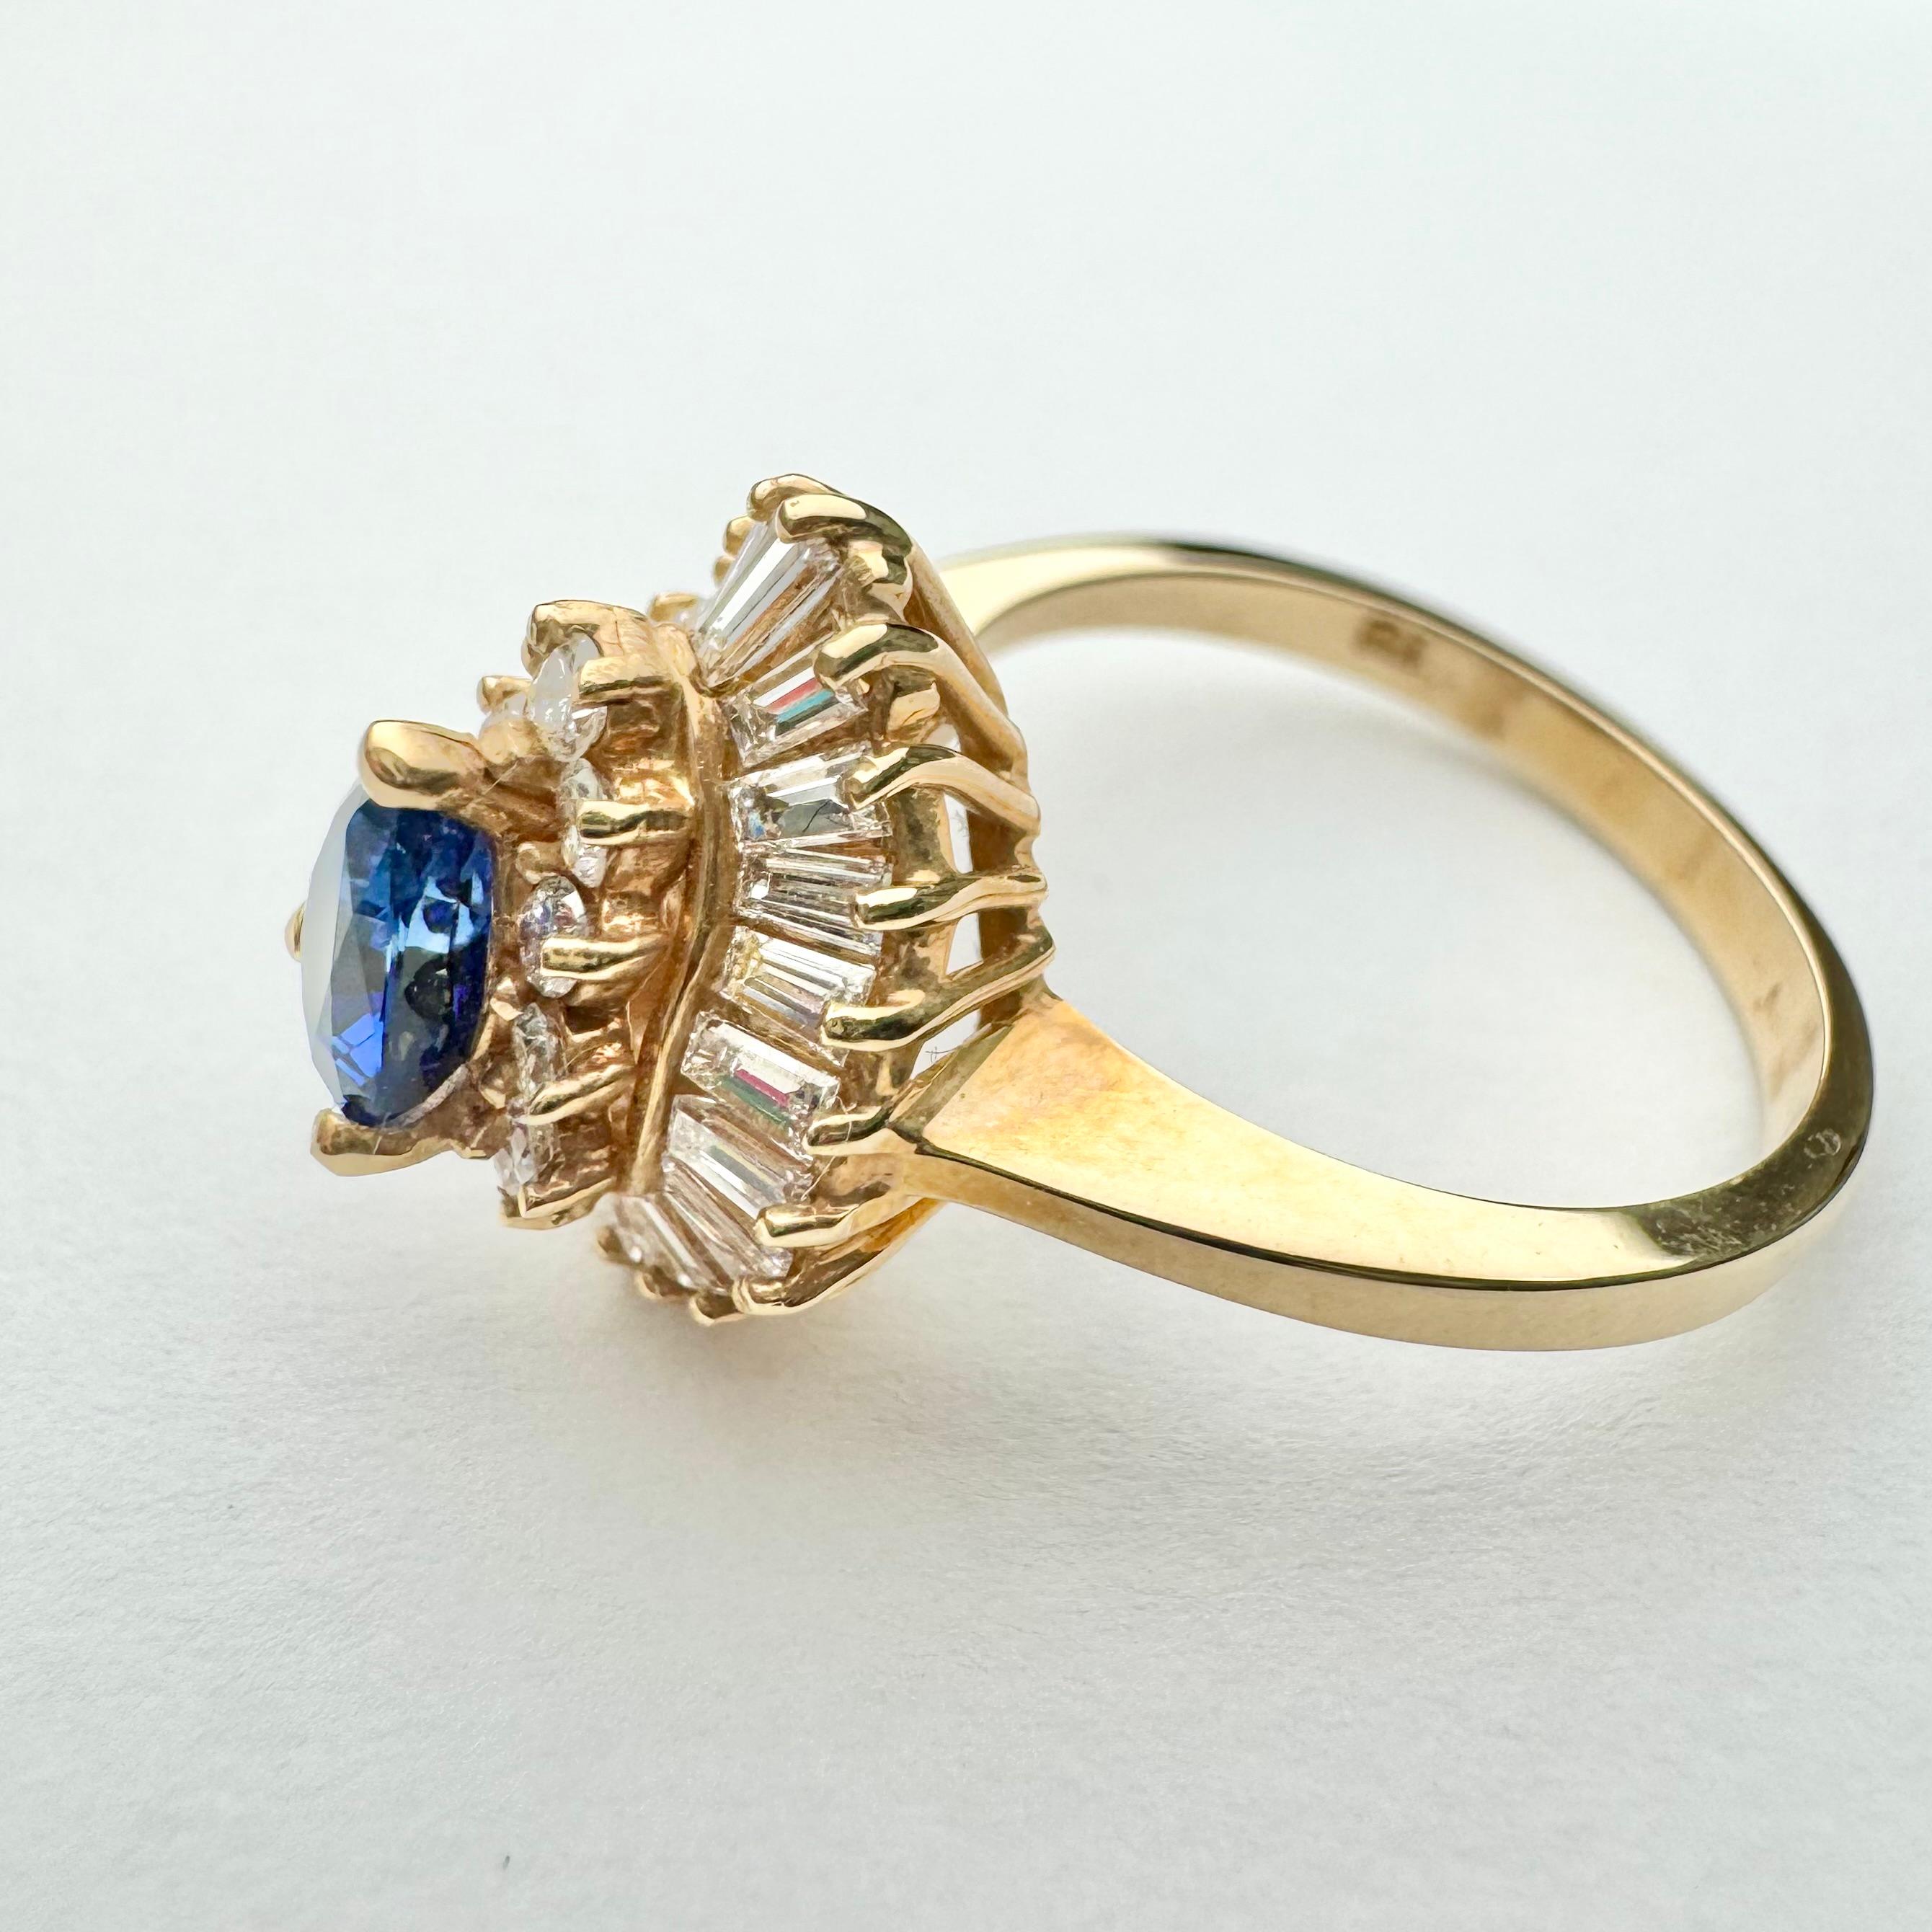 Pear shaped Sapphire and Diamond Ring in 14k yellow gold In Good Condition For Sale In New York, NY